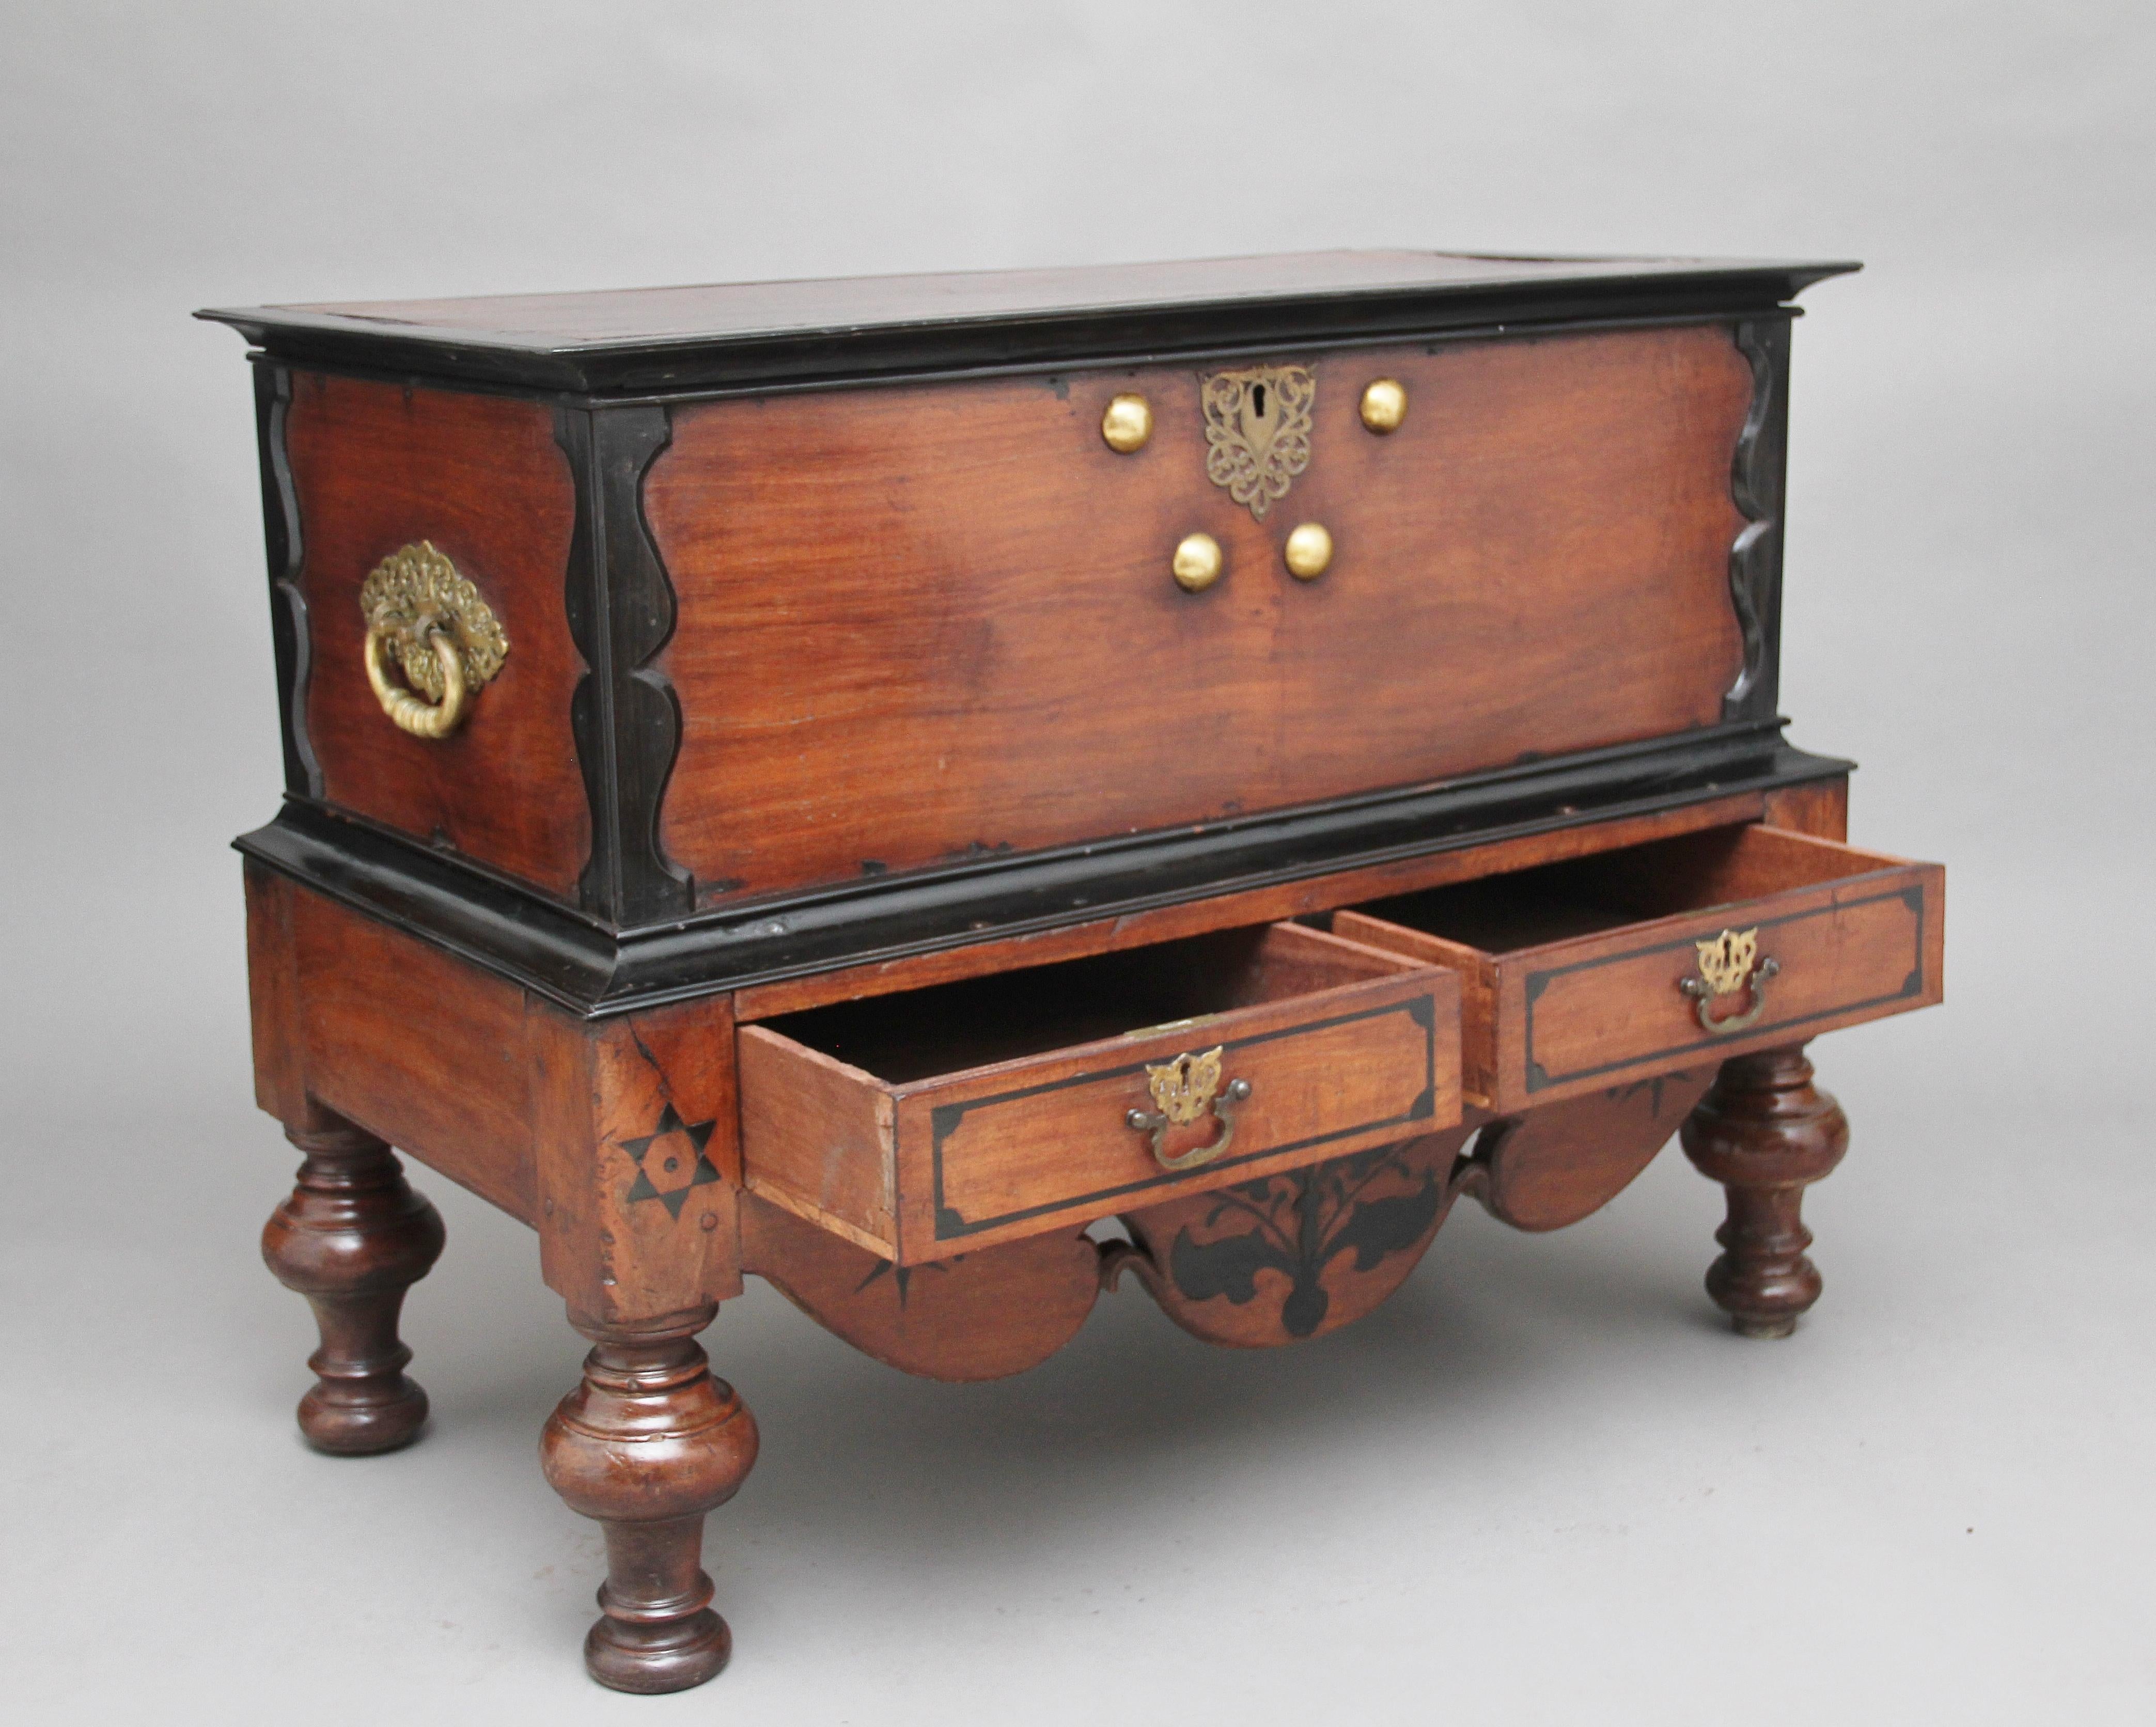 Early 19th century Ceylonese teak and ebony chest / coffer, the hinged lift up top, with ebony moulding, opening to reveal a large compartment space, the outside of the top sections having original brass carrying handles to the sides and brass stud